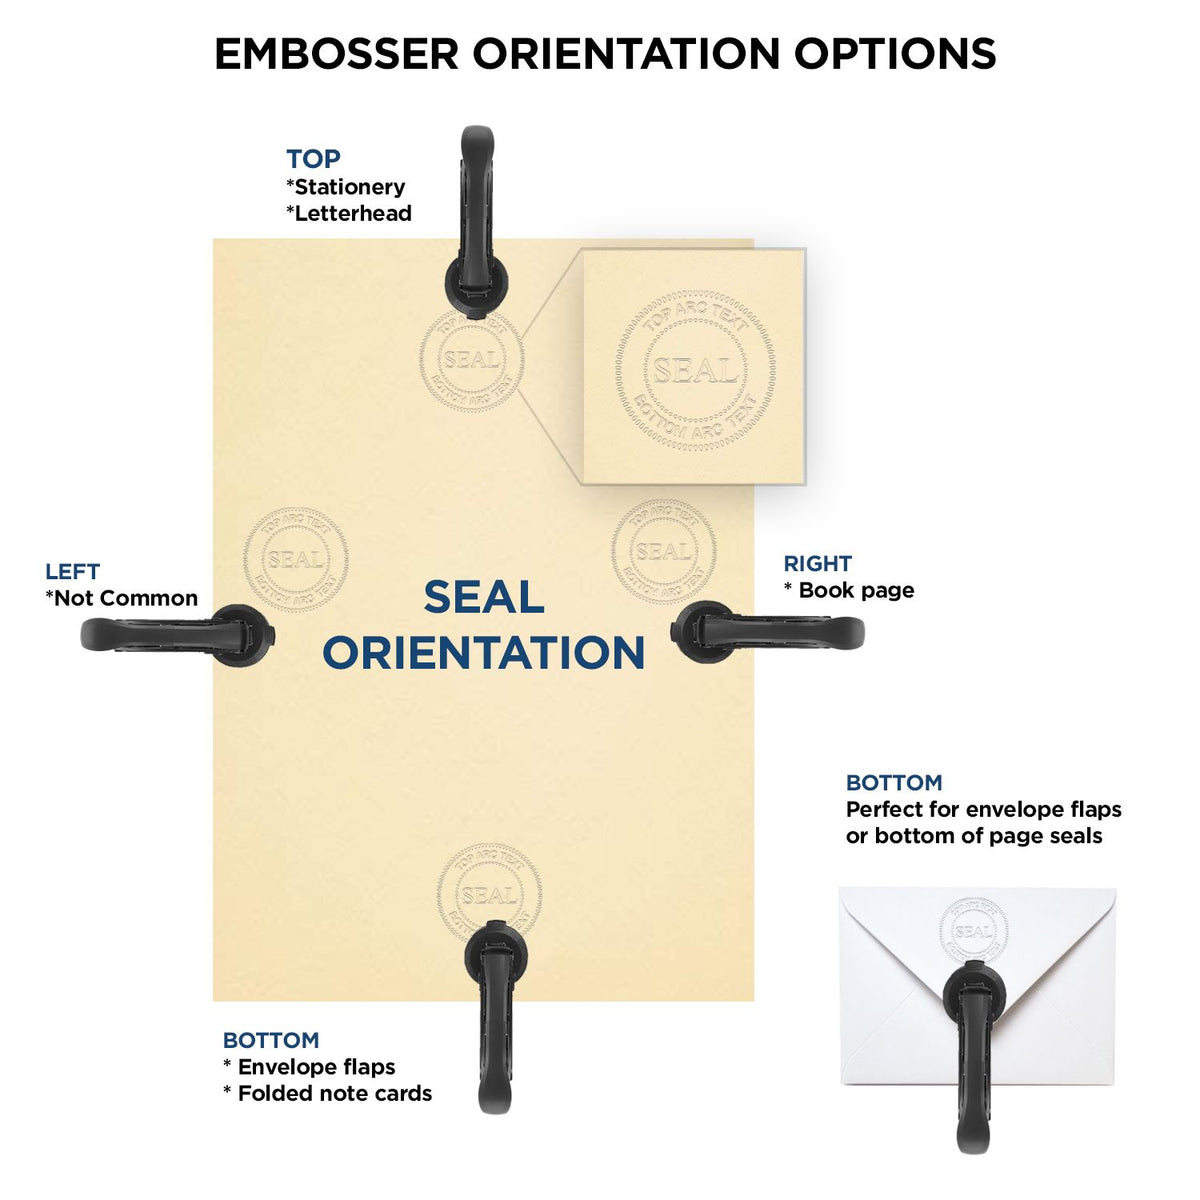 An infographic for the Handheld Delaware Professional Geologist Embosser showing embosser orientation, this is showing examples of a top, bottom, right and left insert.